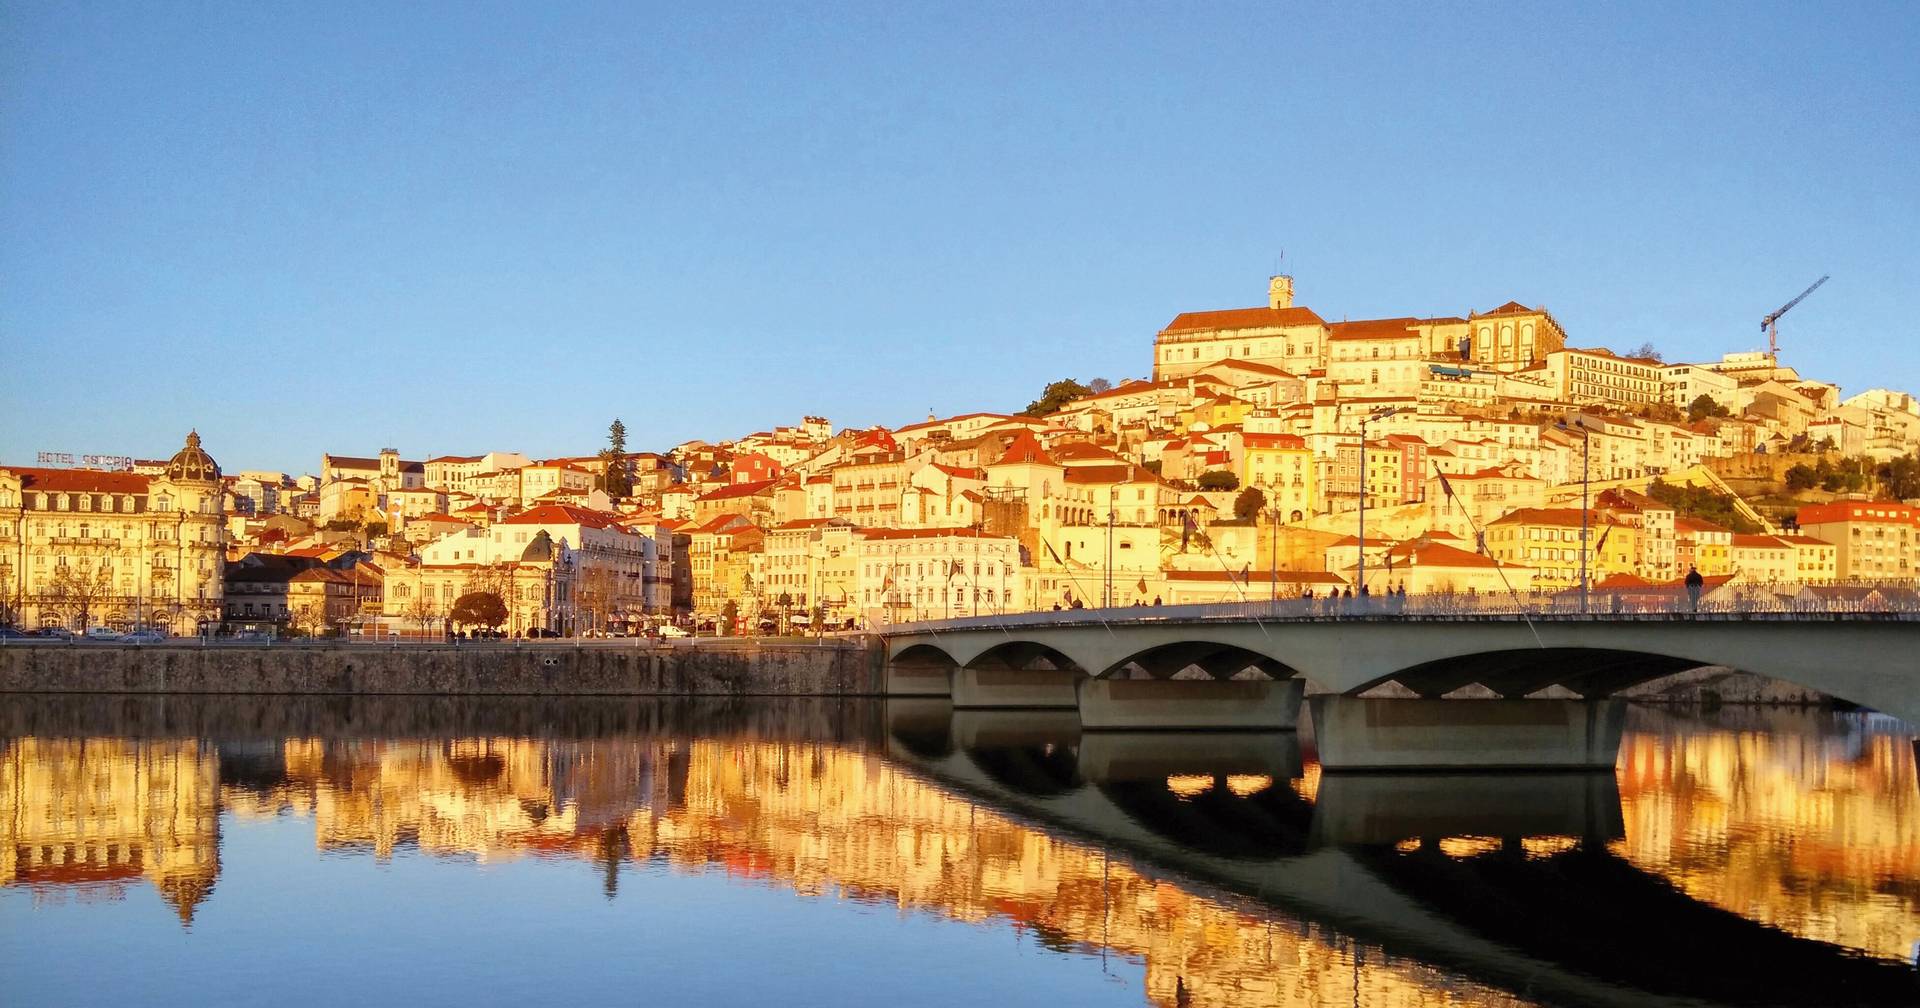 Portugal leads the way in raising interest rates on home purchases in the eurozone